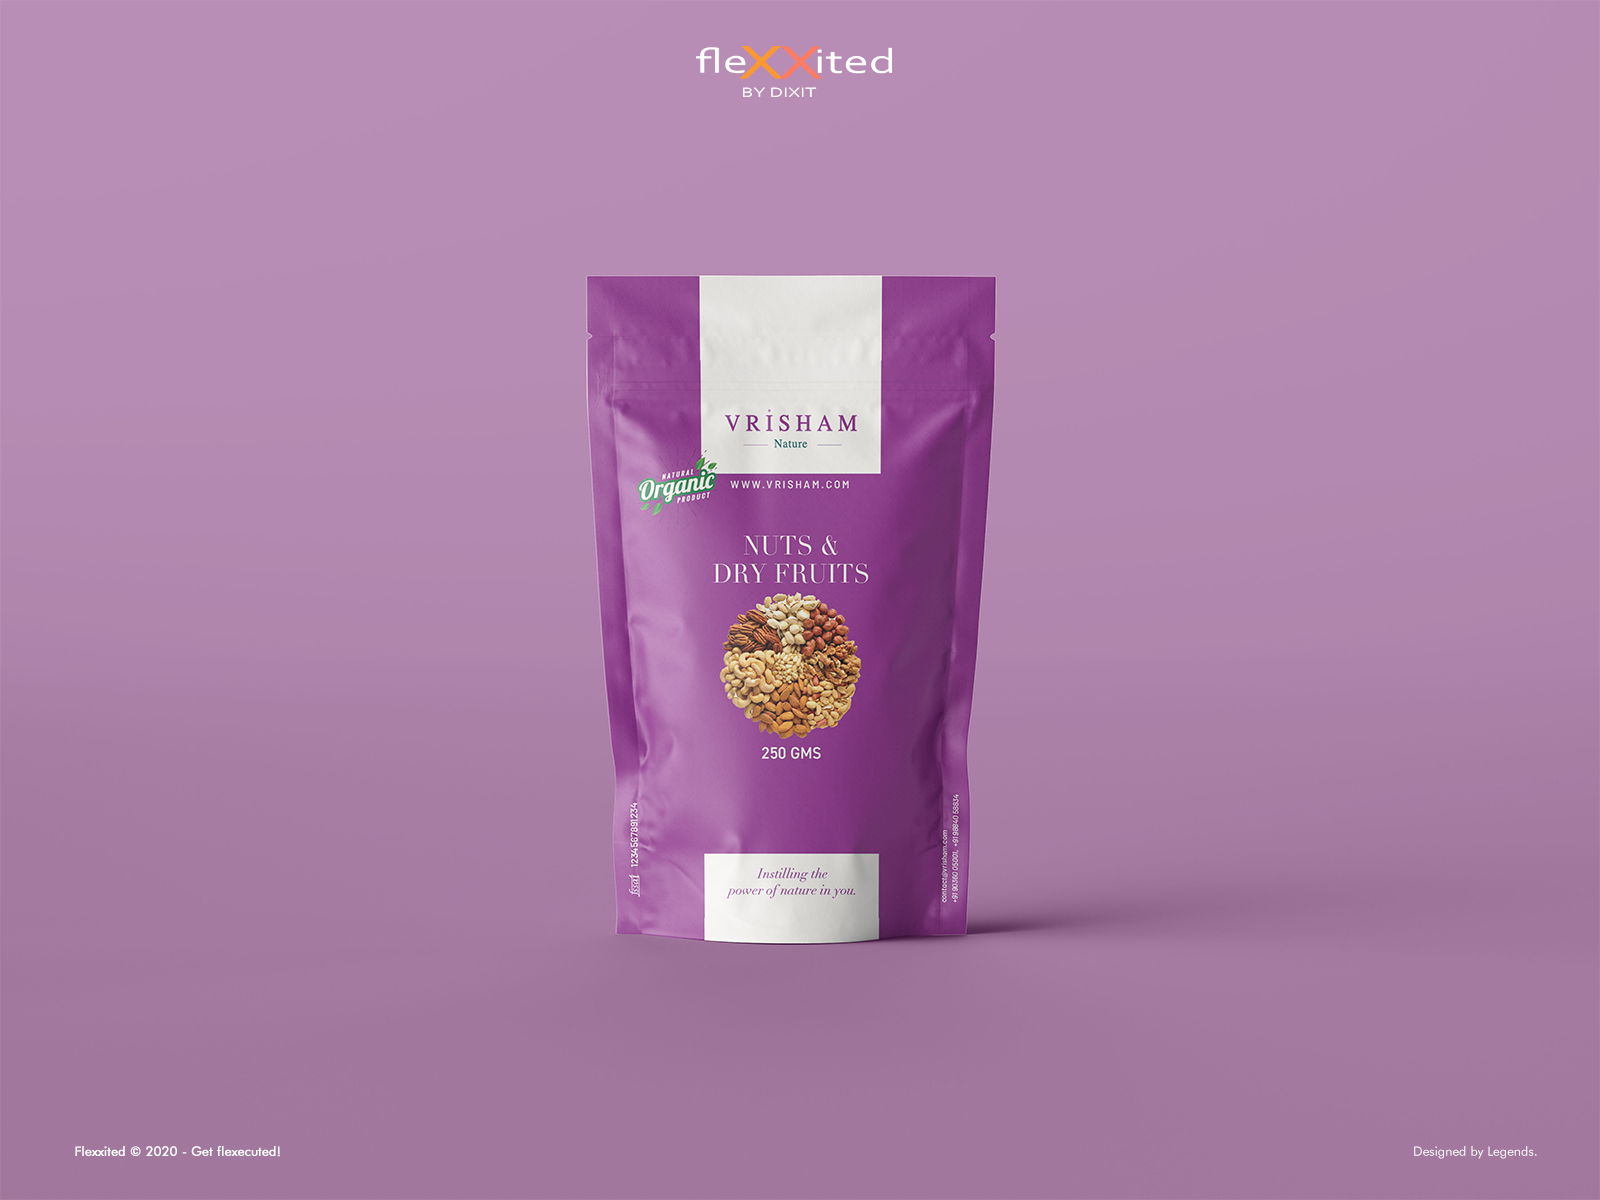 Packaging Design by Flexxited on Dribbble